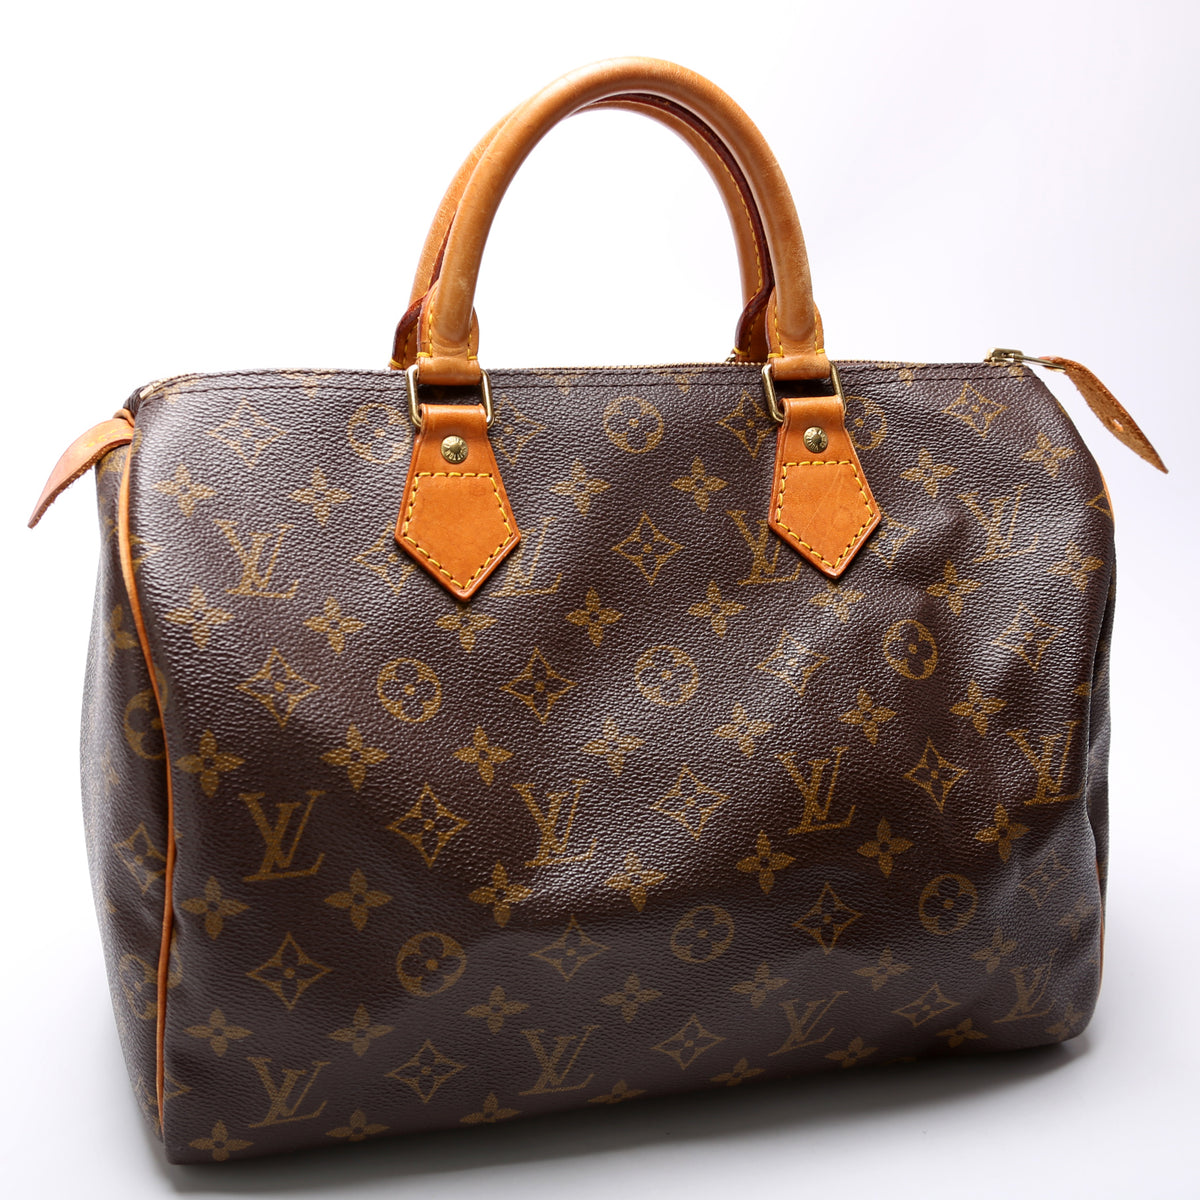 How to SPOT an AUTHENTIC LOUIS VUITTON SPEEDY 30 HANDBAG and WHERE